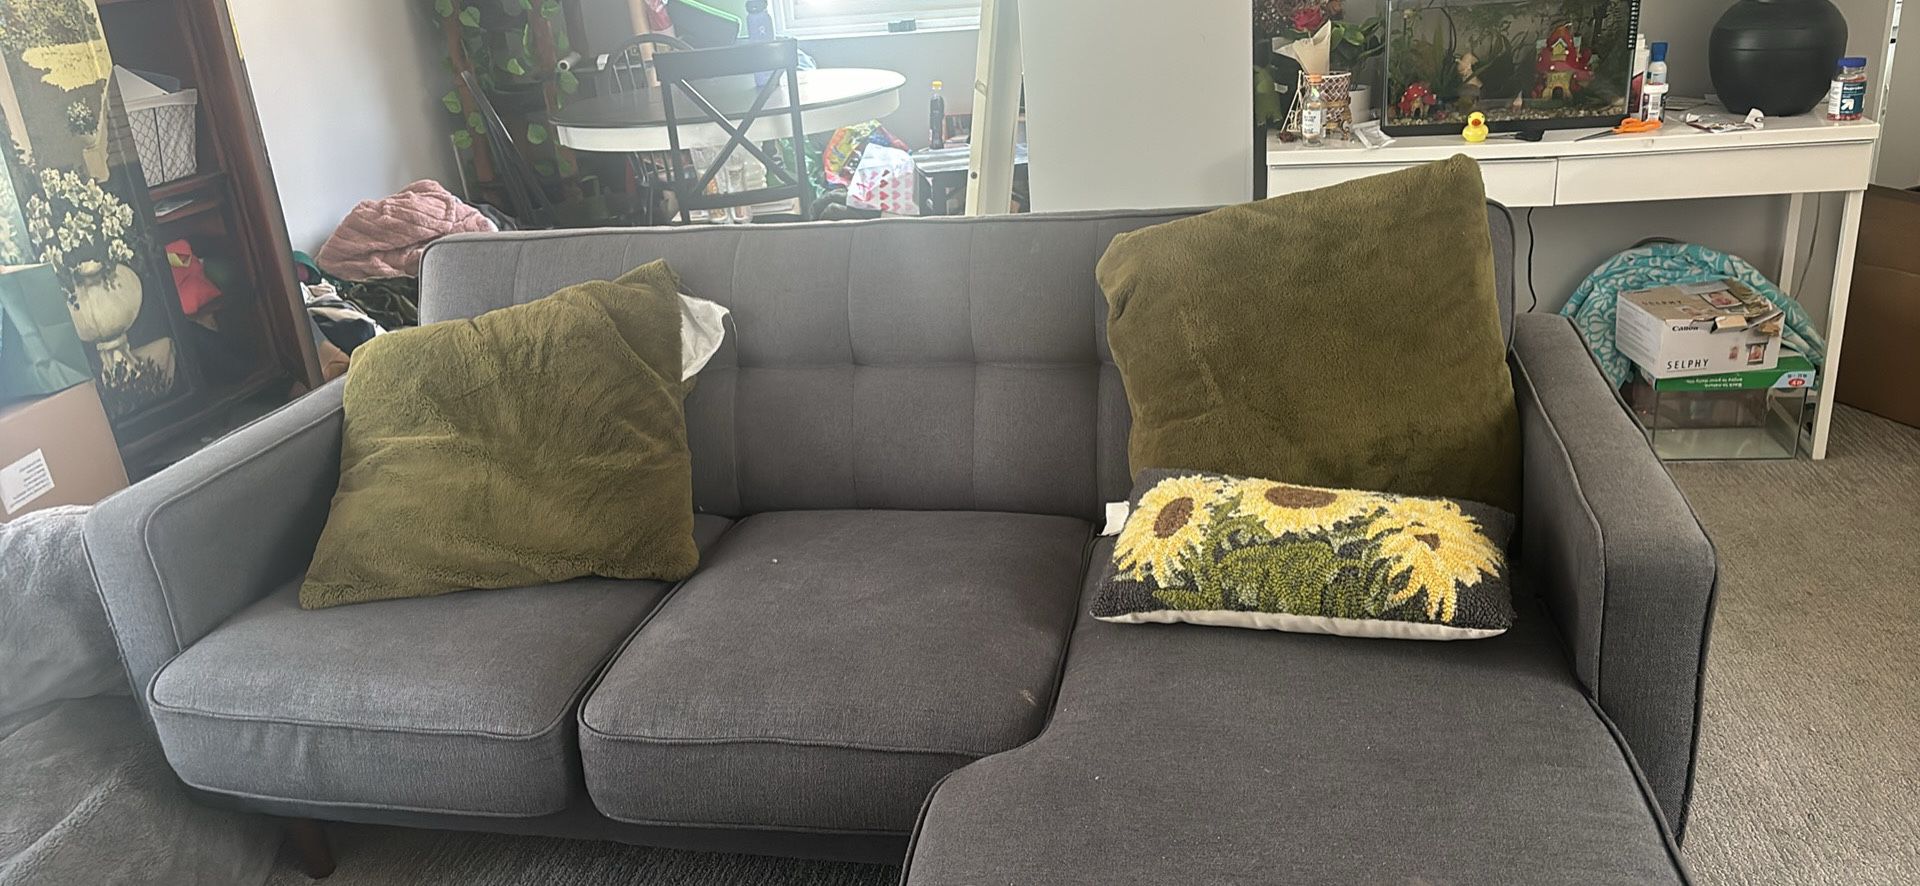 Gray fabric couch